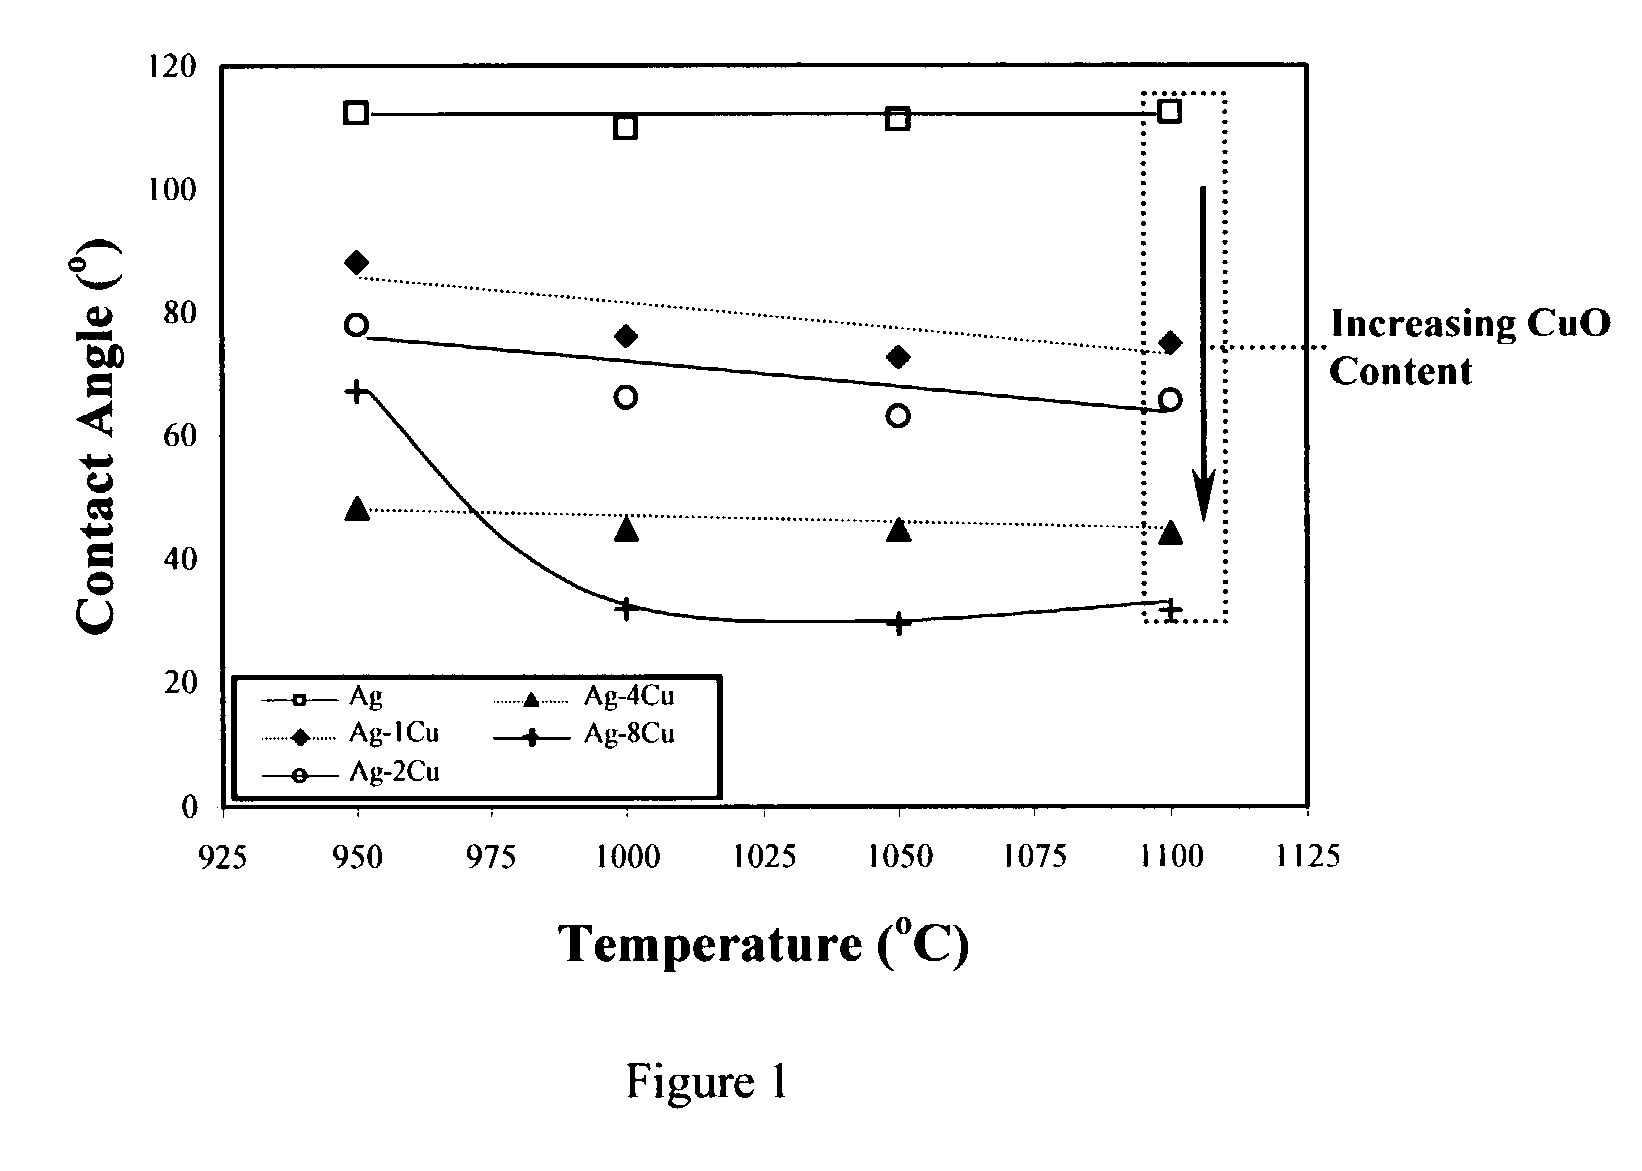 Oxidation ceramic to metal braze seals for applications in high temperature electrochemical devices and method of making